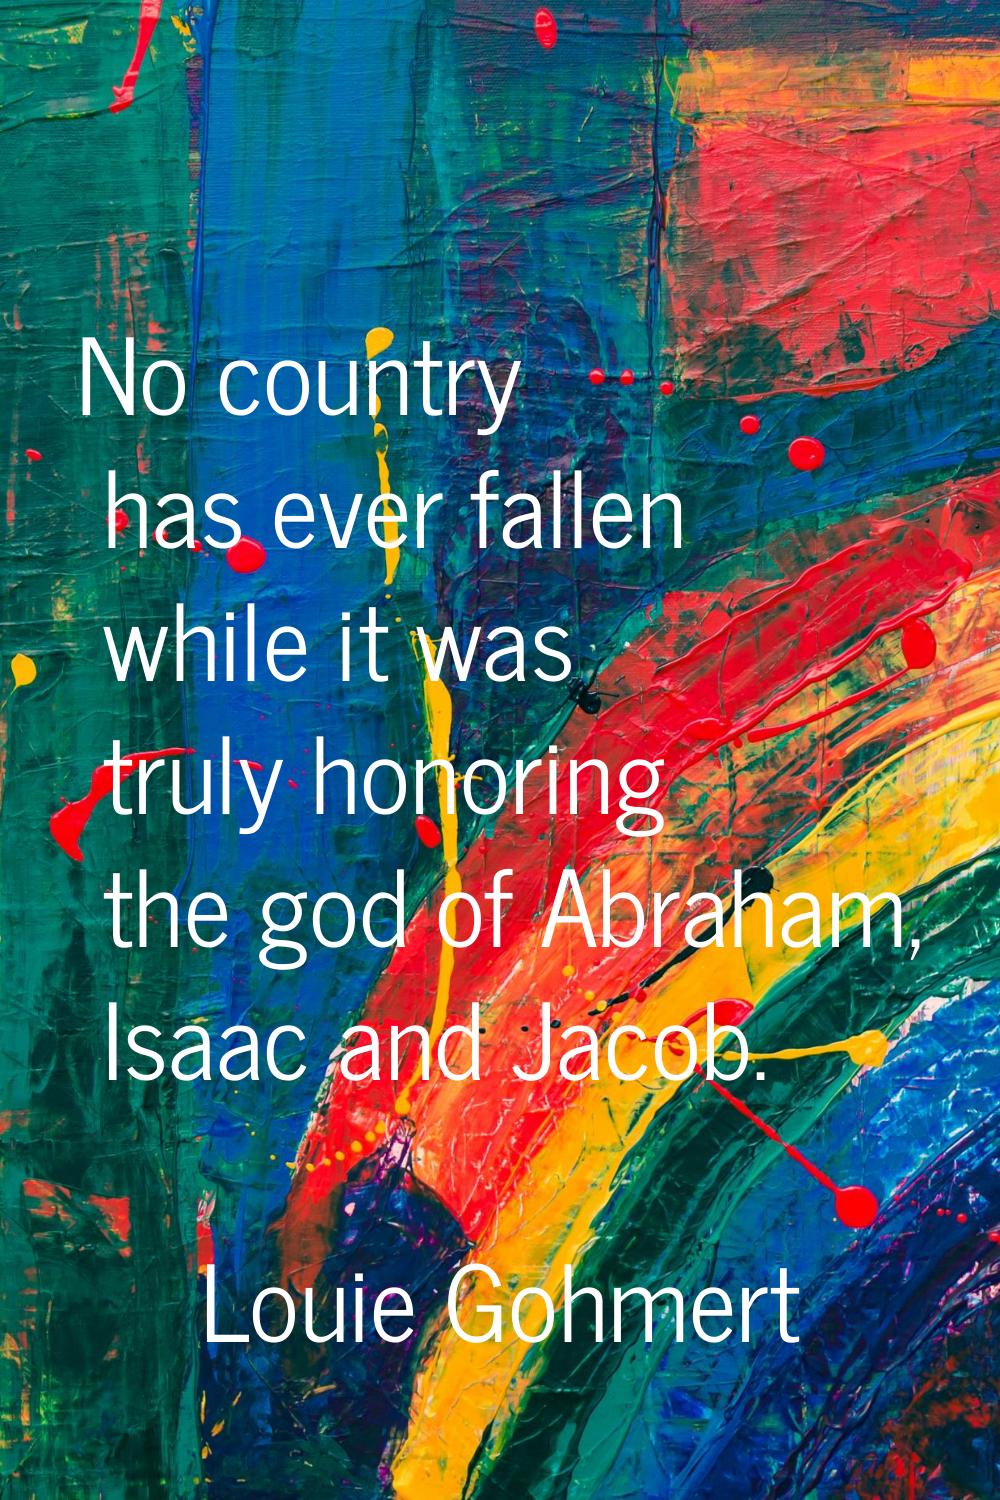 No country has ever fallen while it was truly honoring the god of Abraham, Isaac and Jacob.